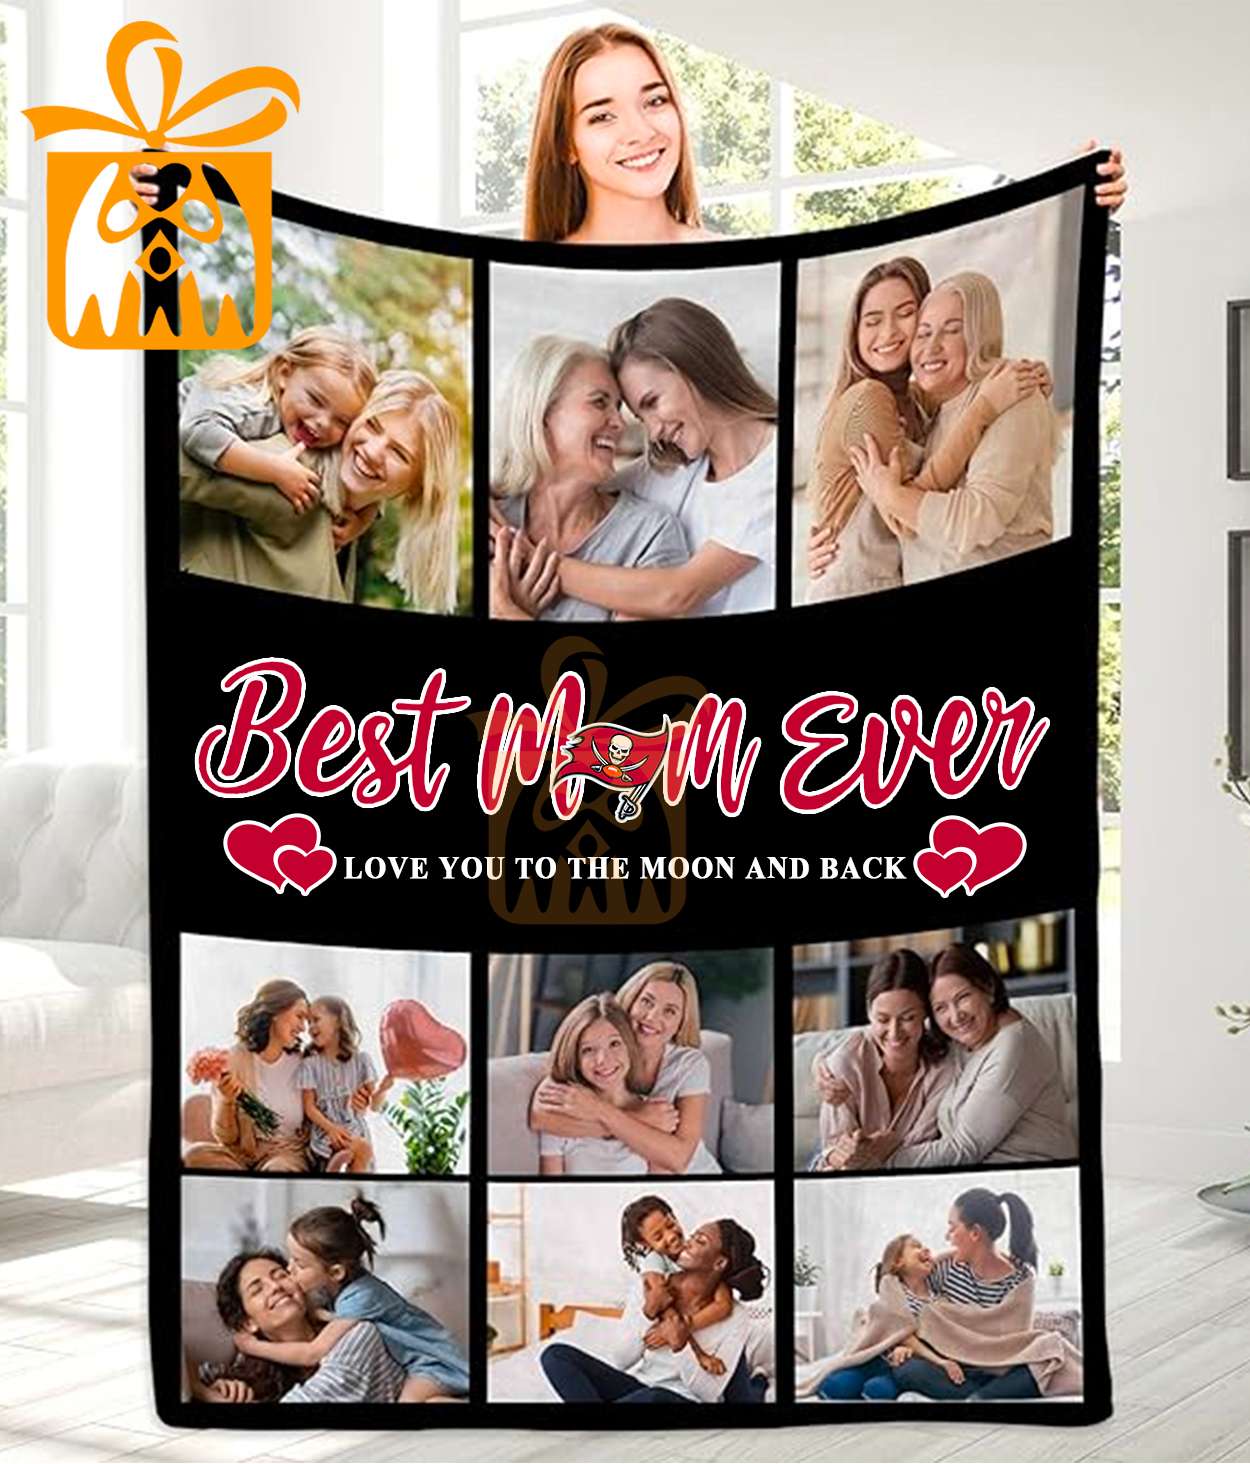 Best Mom Ever Custom NFL Tampa Bay Buccaneers Blankets with Pictures - Perfect Mother’s Day Gift